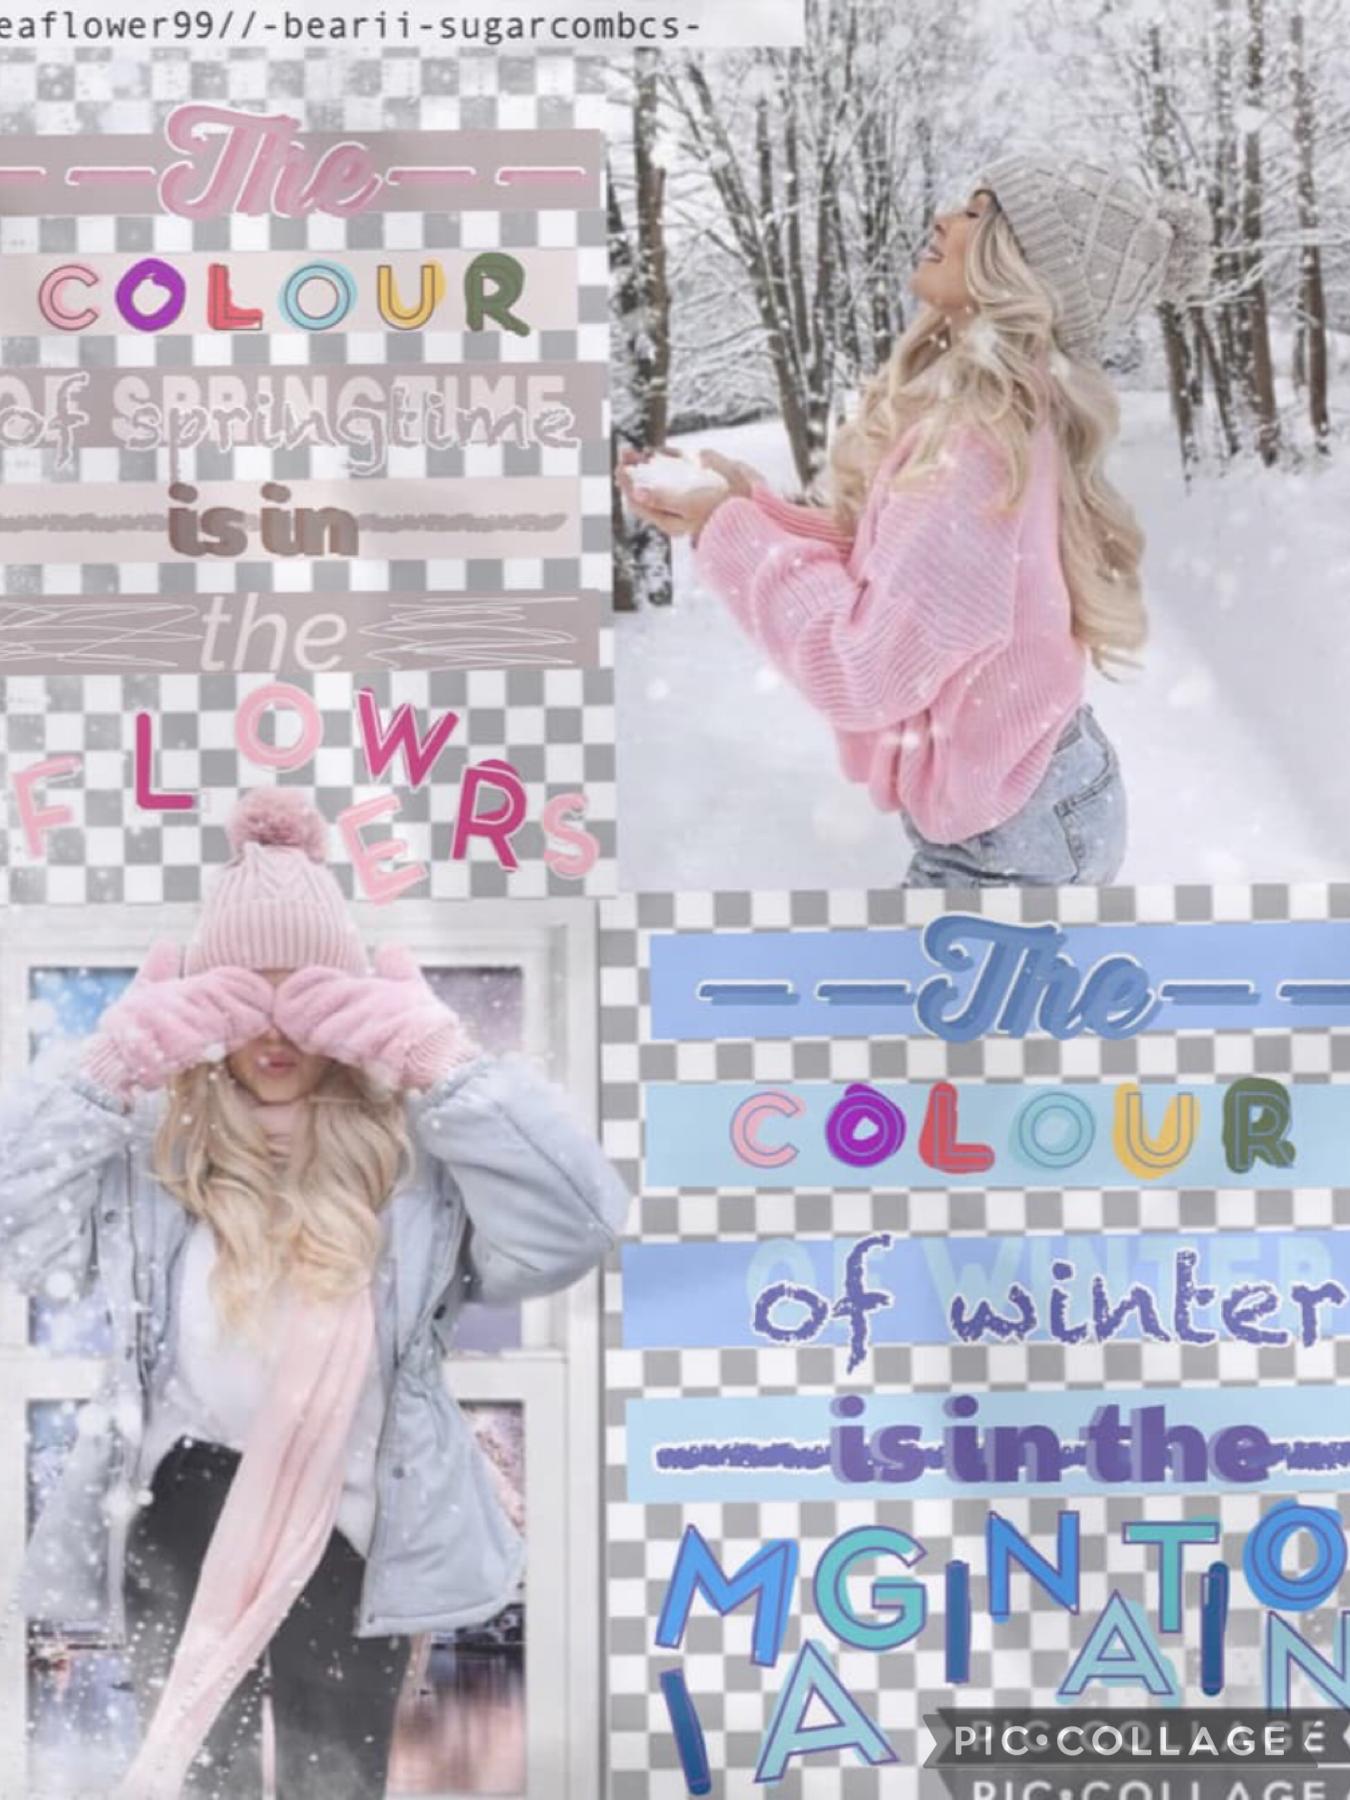 🌨Tap🌨
Collab with the awesome bearii-sugarcombs hope I spelled that right it was super fun go and give her a follow right now please! Also this is probably my last winter collage till next winter!❄️